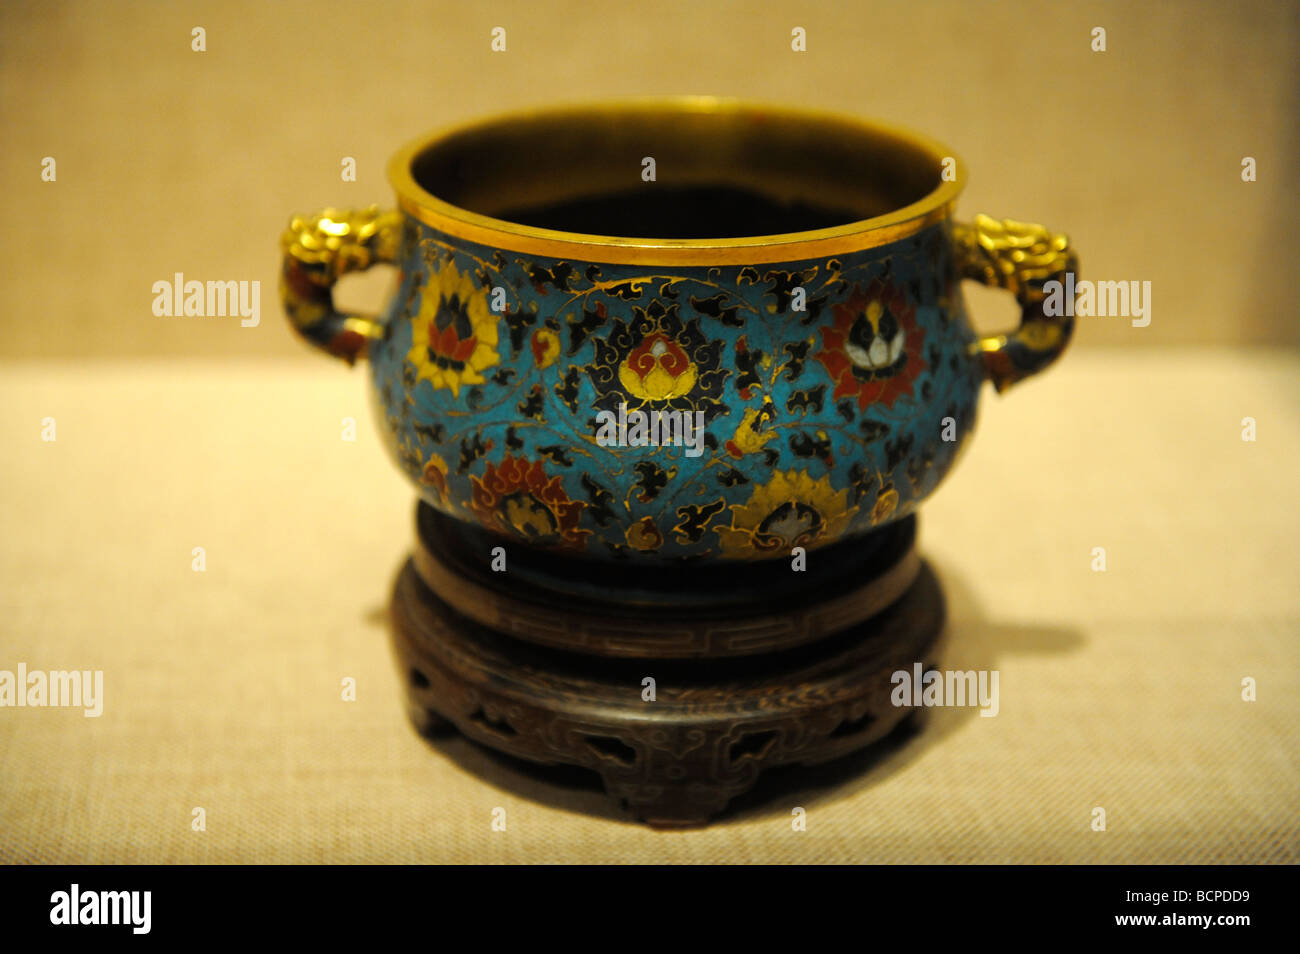 Cloisonné incense burner from Xuande period in Ming Dynasty, Capital Museum, Beijing, China Stock Photo